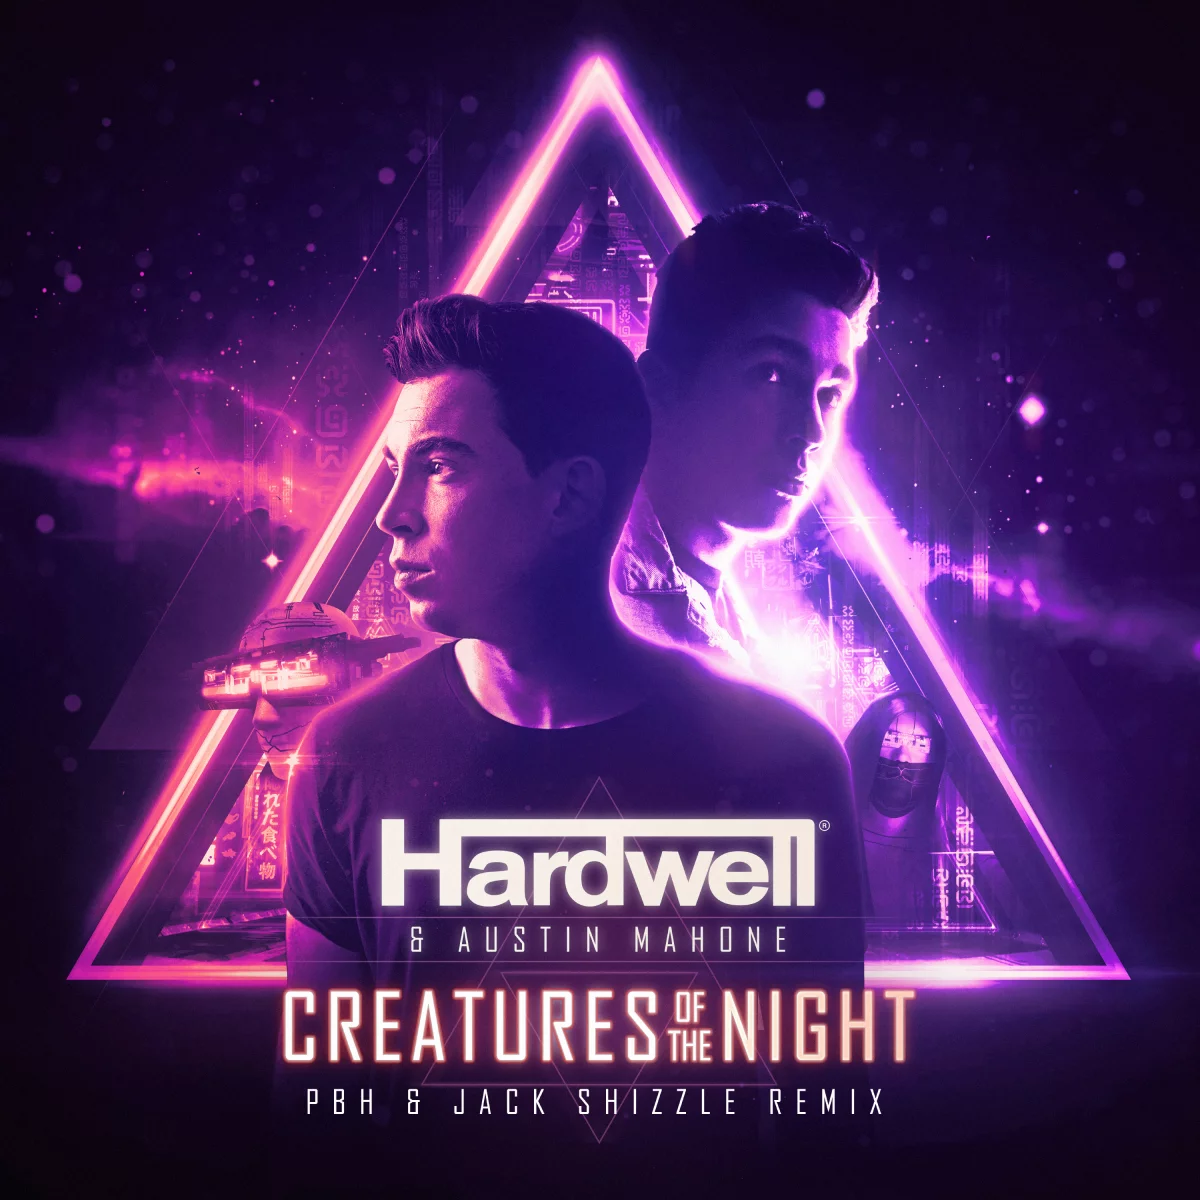 Creatures Of The Night (PBH & Jack Shizzle Remix) - 